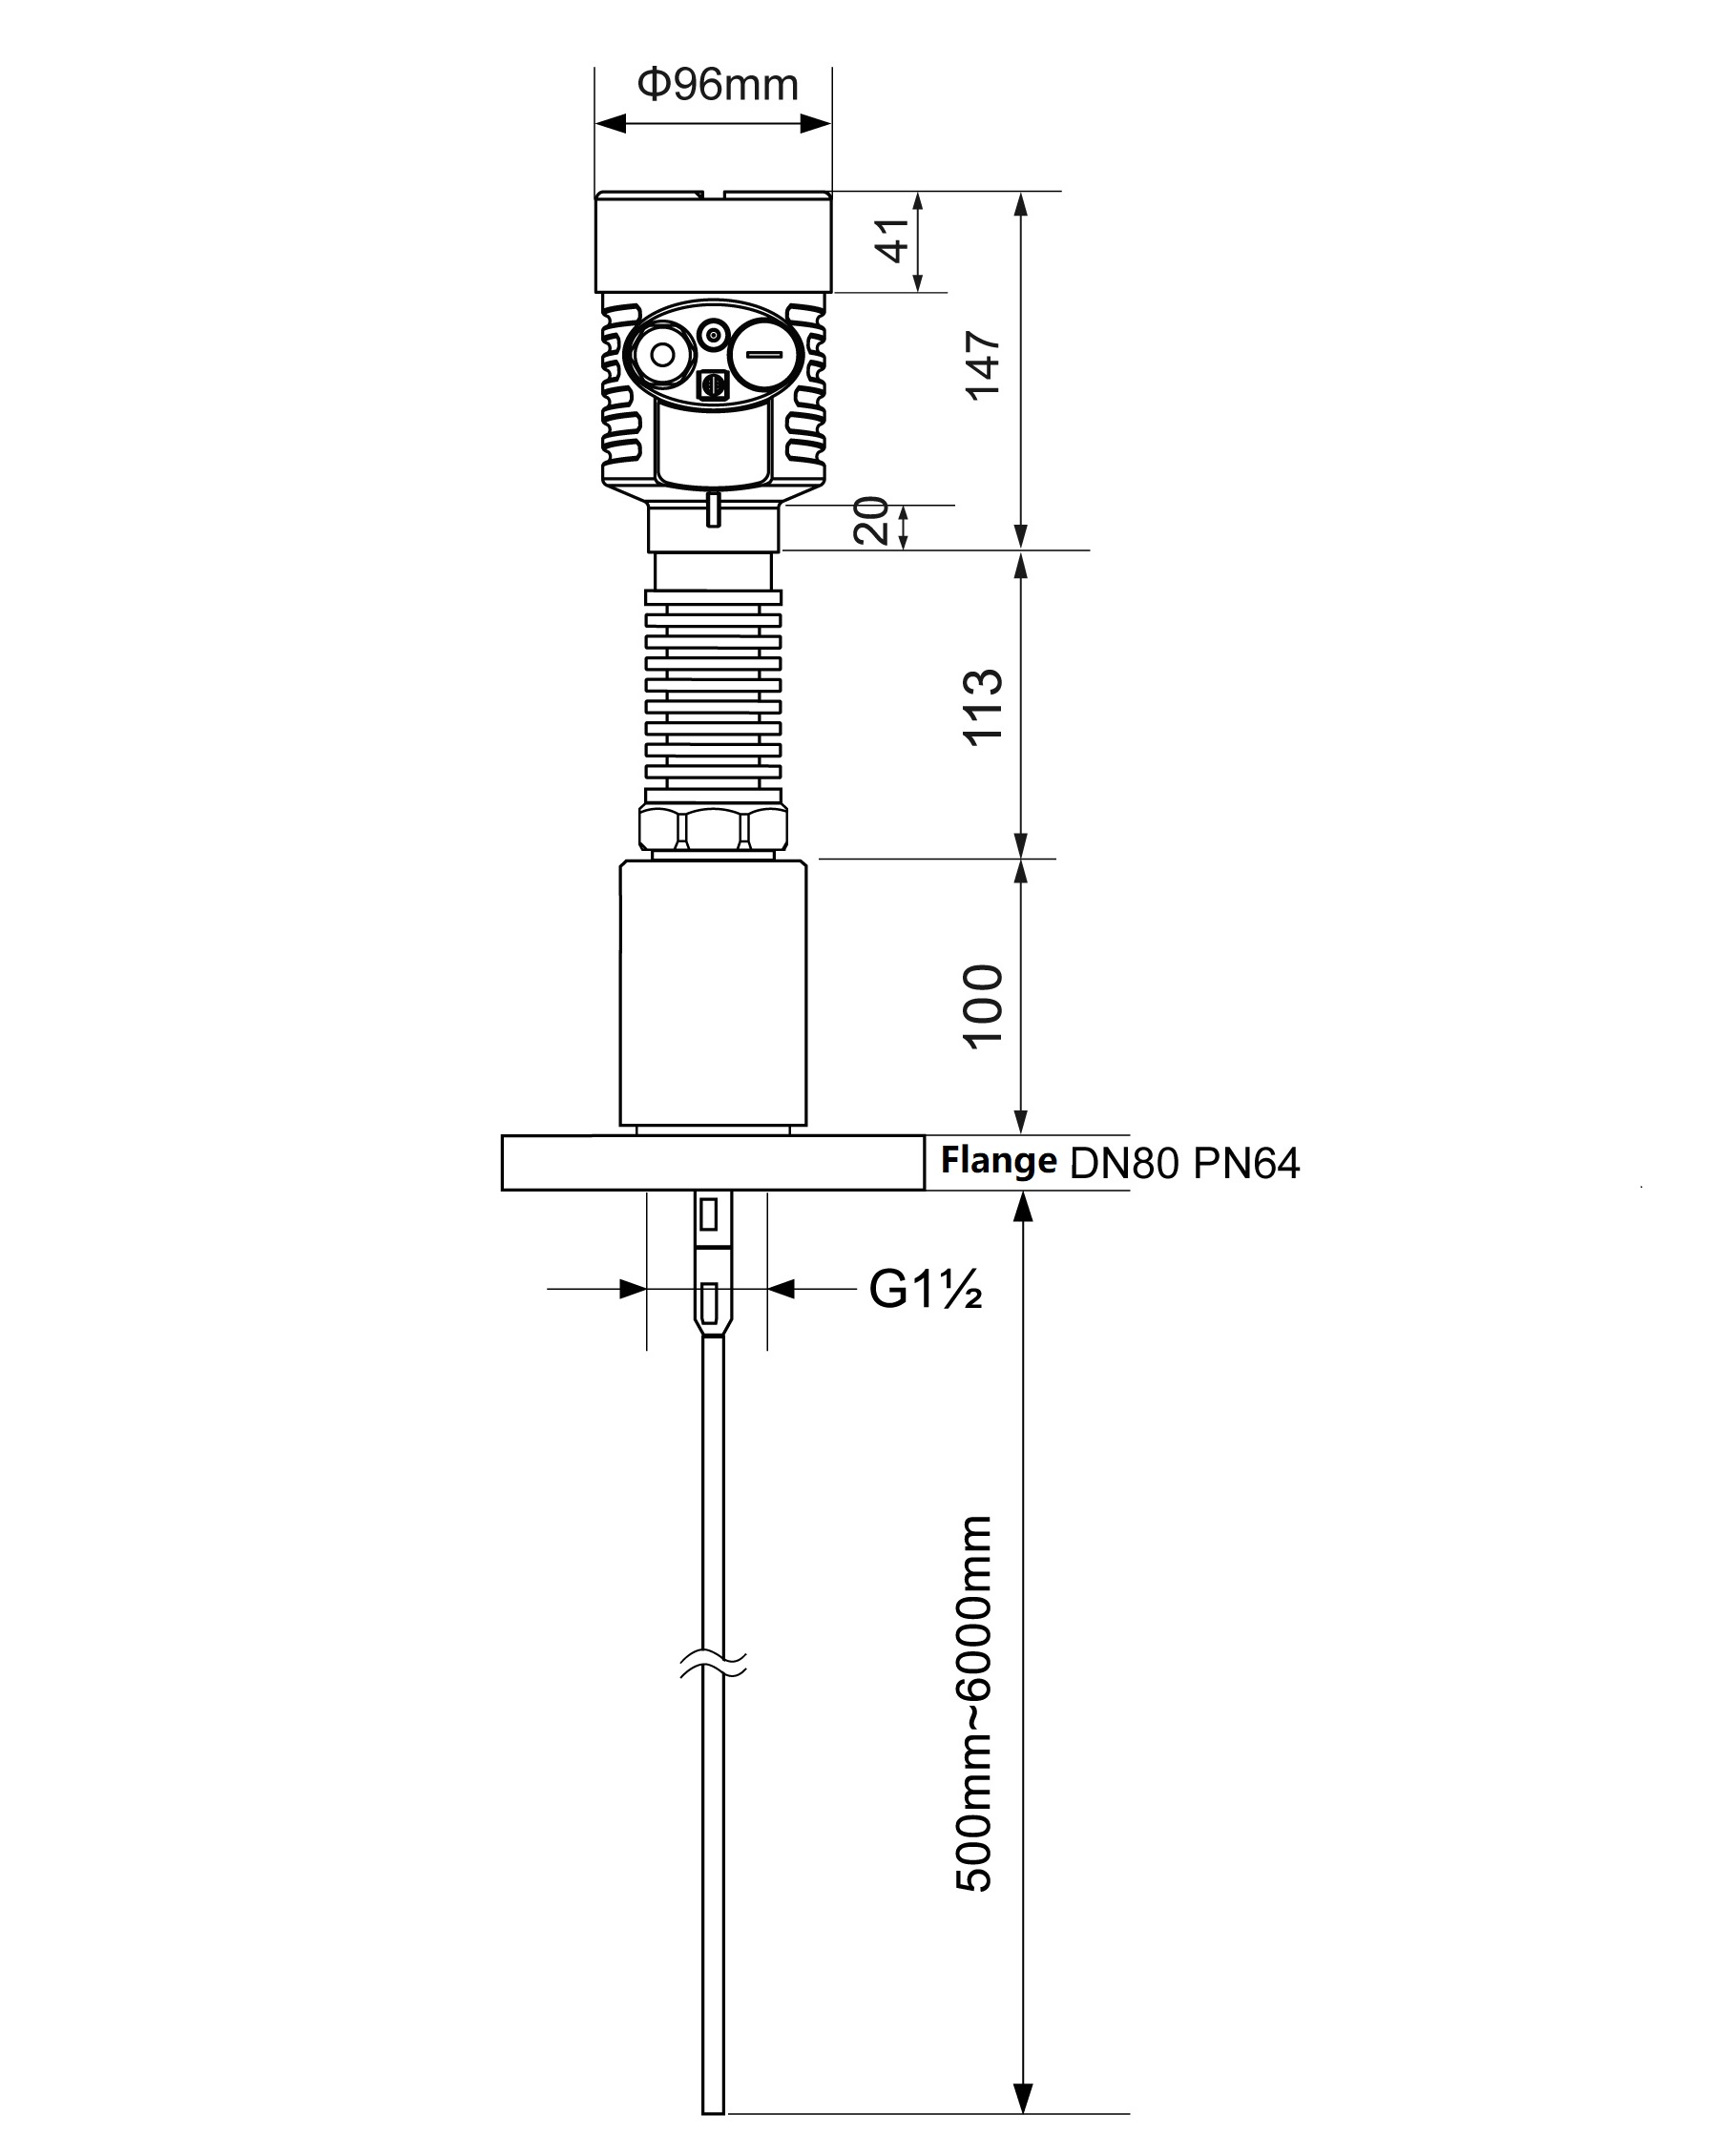 Drawing for Formation water level transmitter